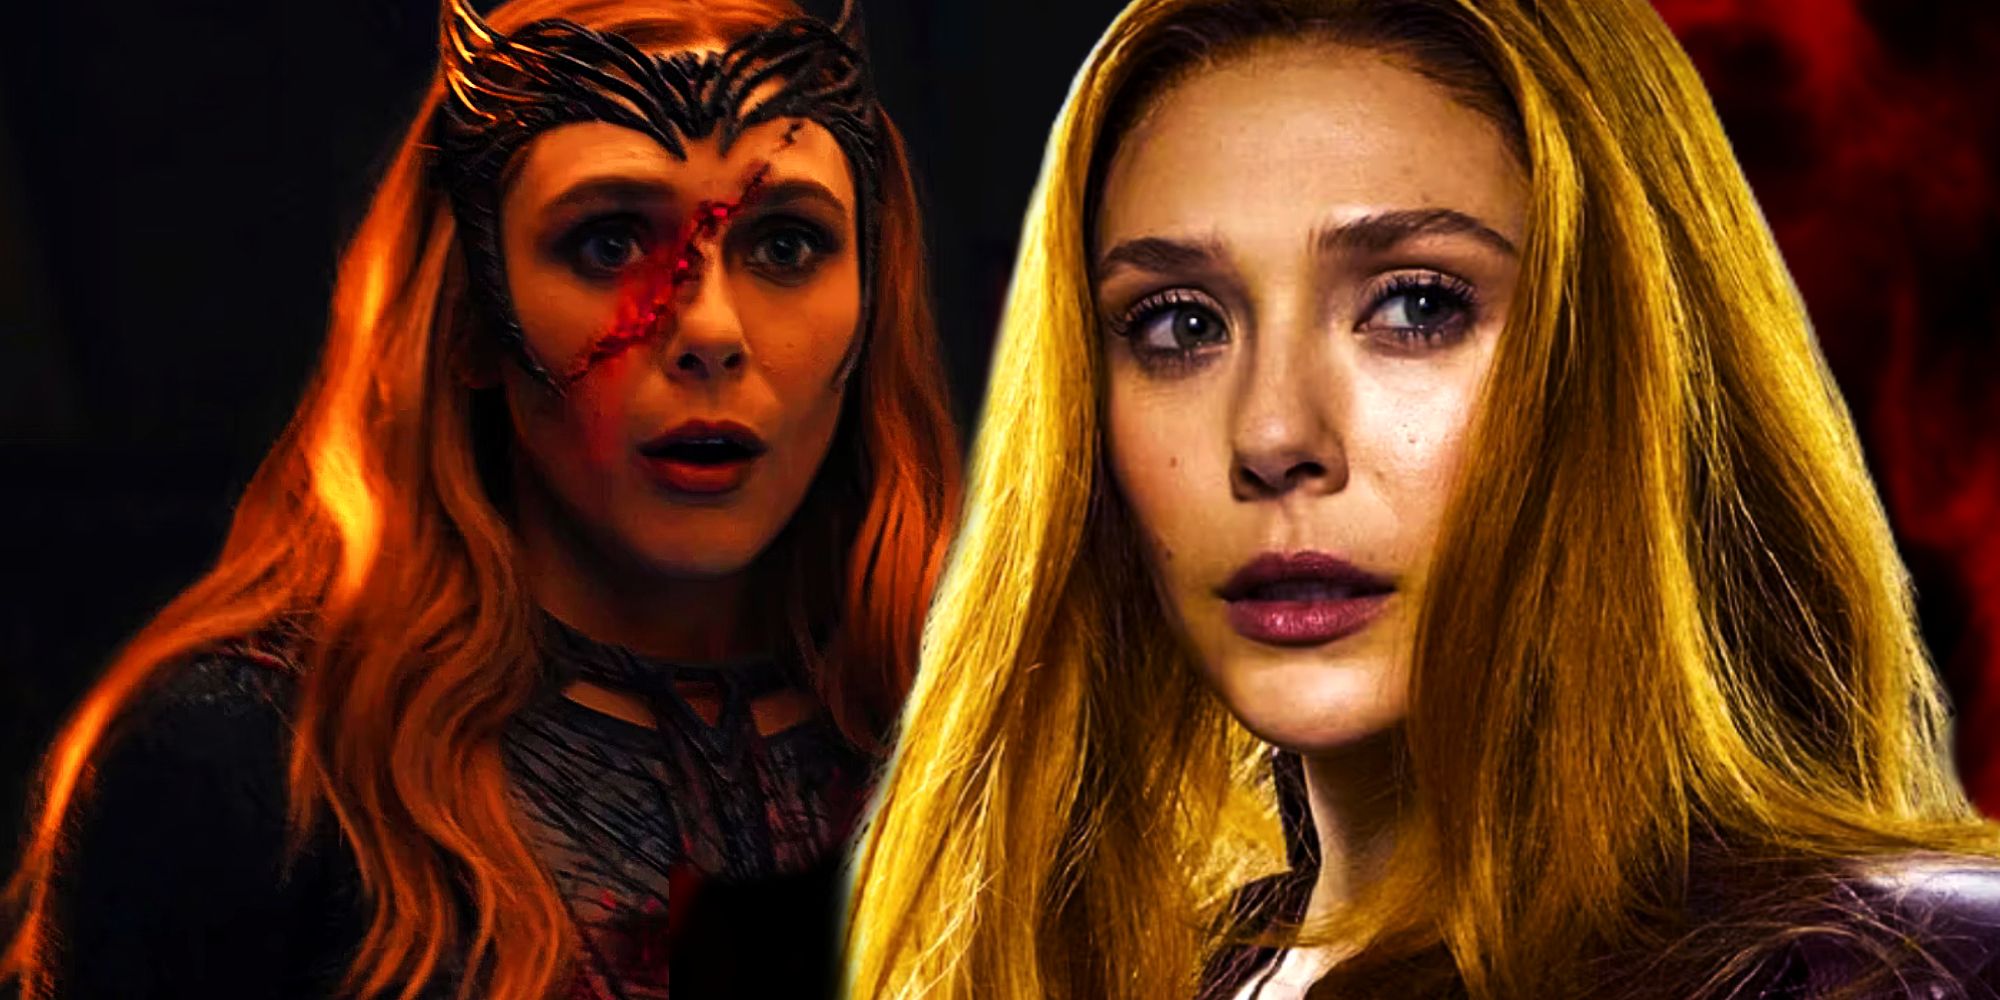 Wanda Maximoff Poses in Avengers Infinity War and Scarlet Witch Regenerates in Doctor Strange in the Multiverse of Madness